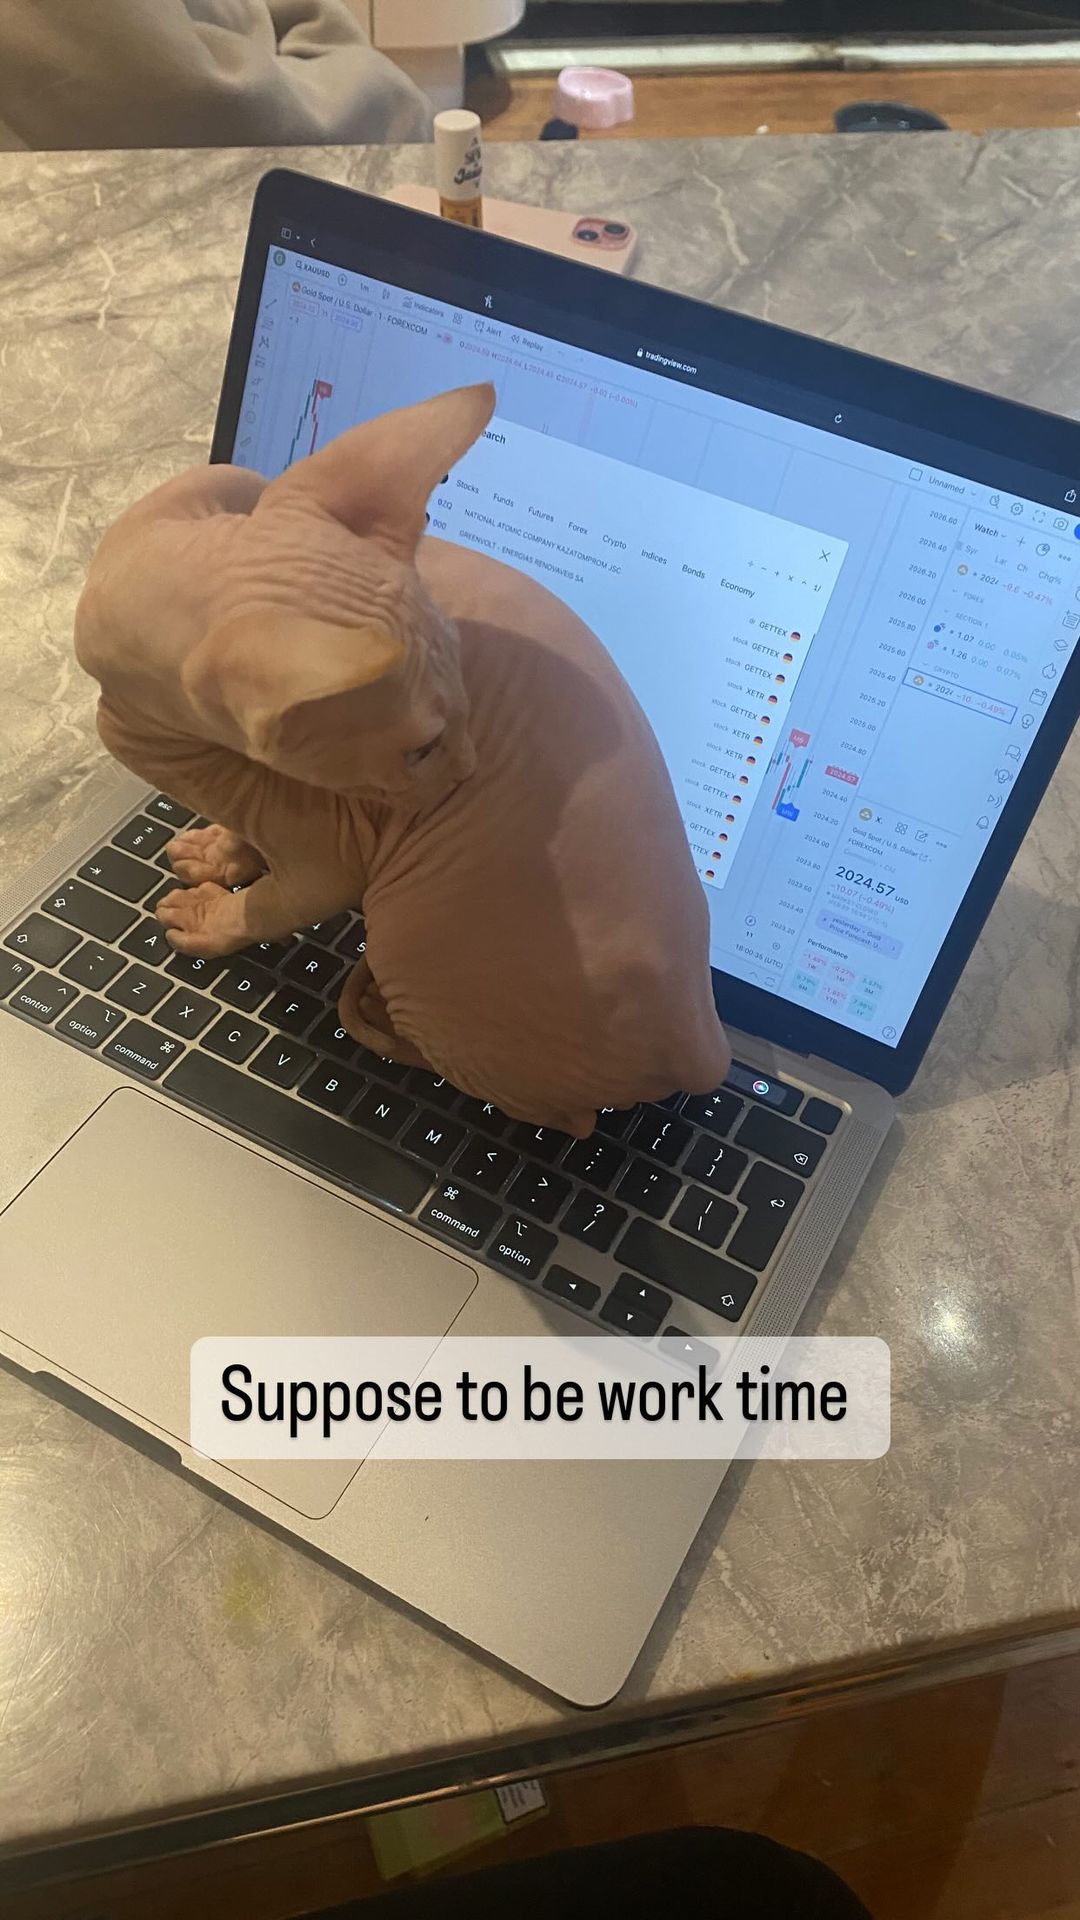 Katie Price has revealed her new sphynx cat perched on her laptop